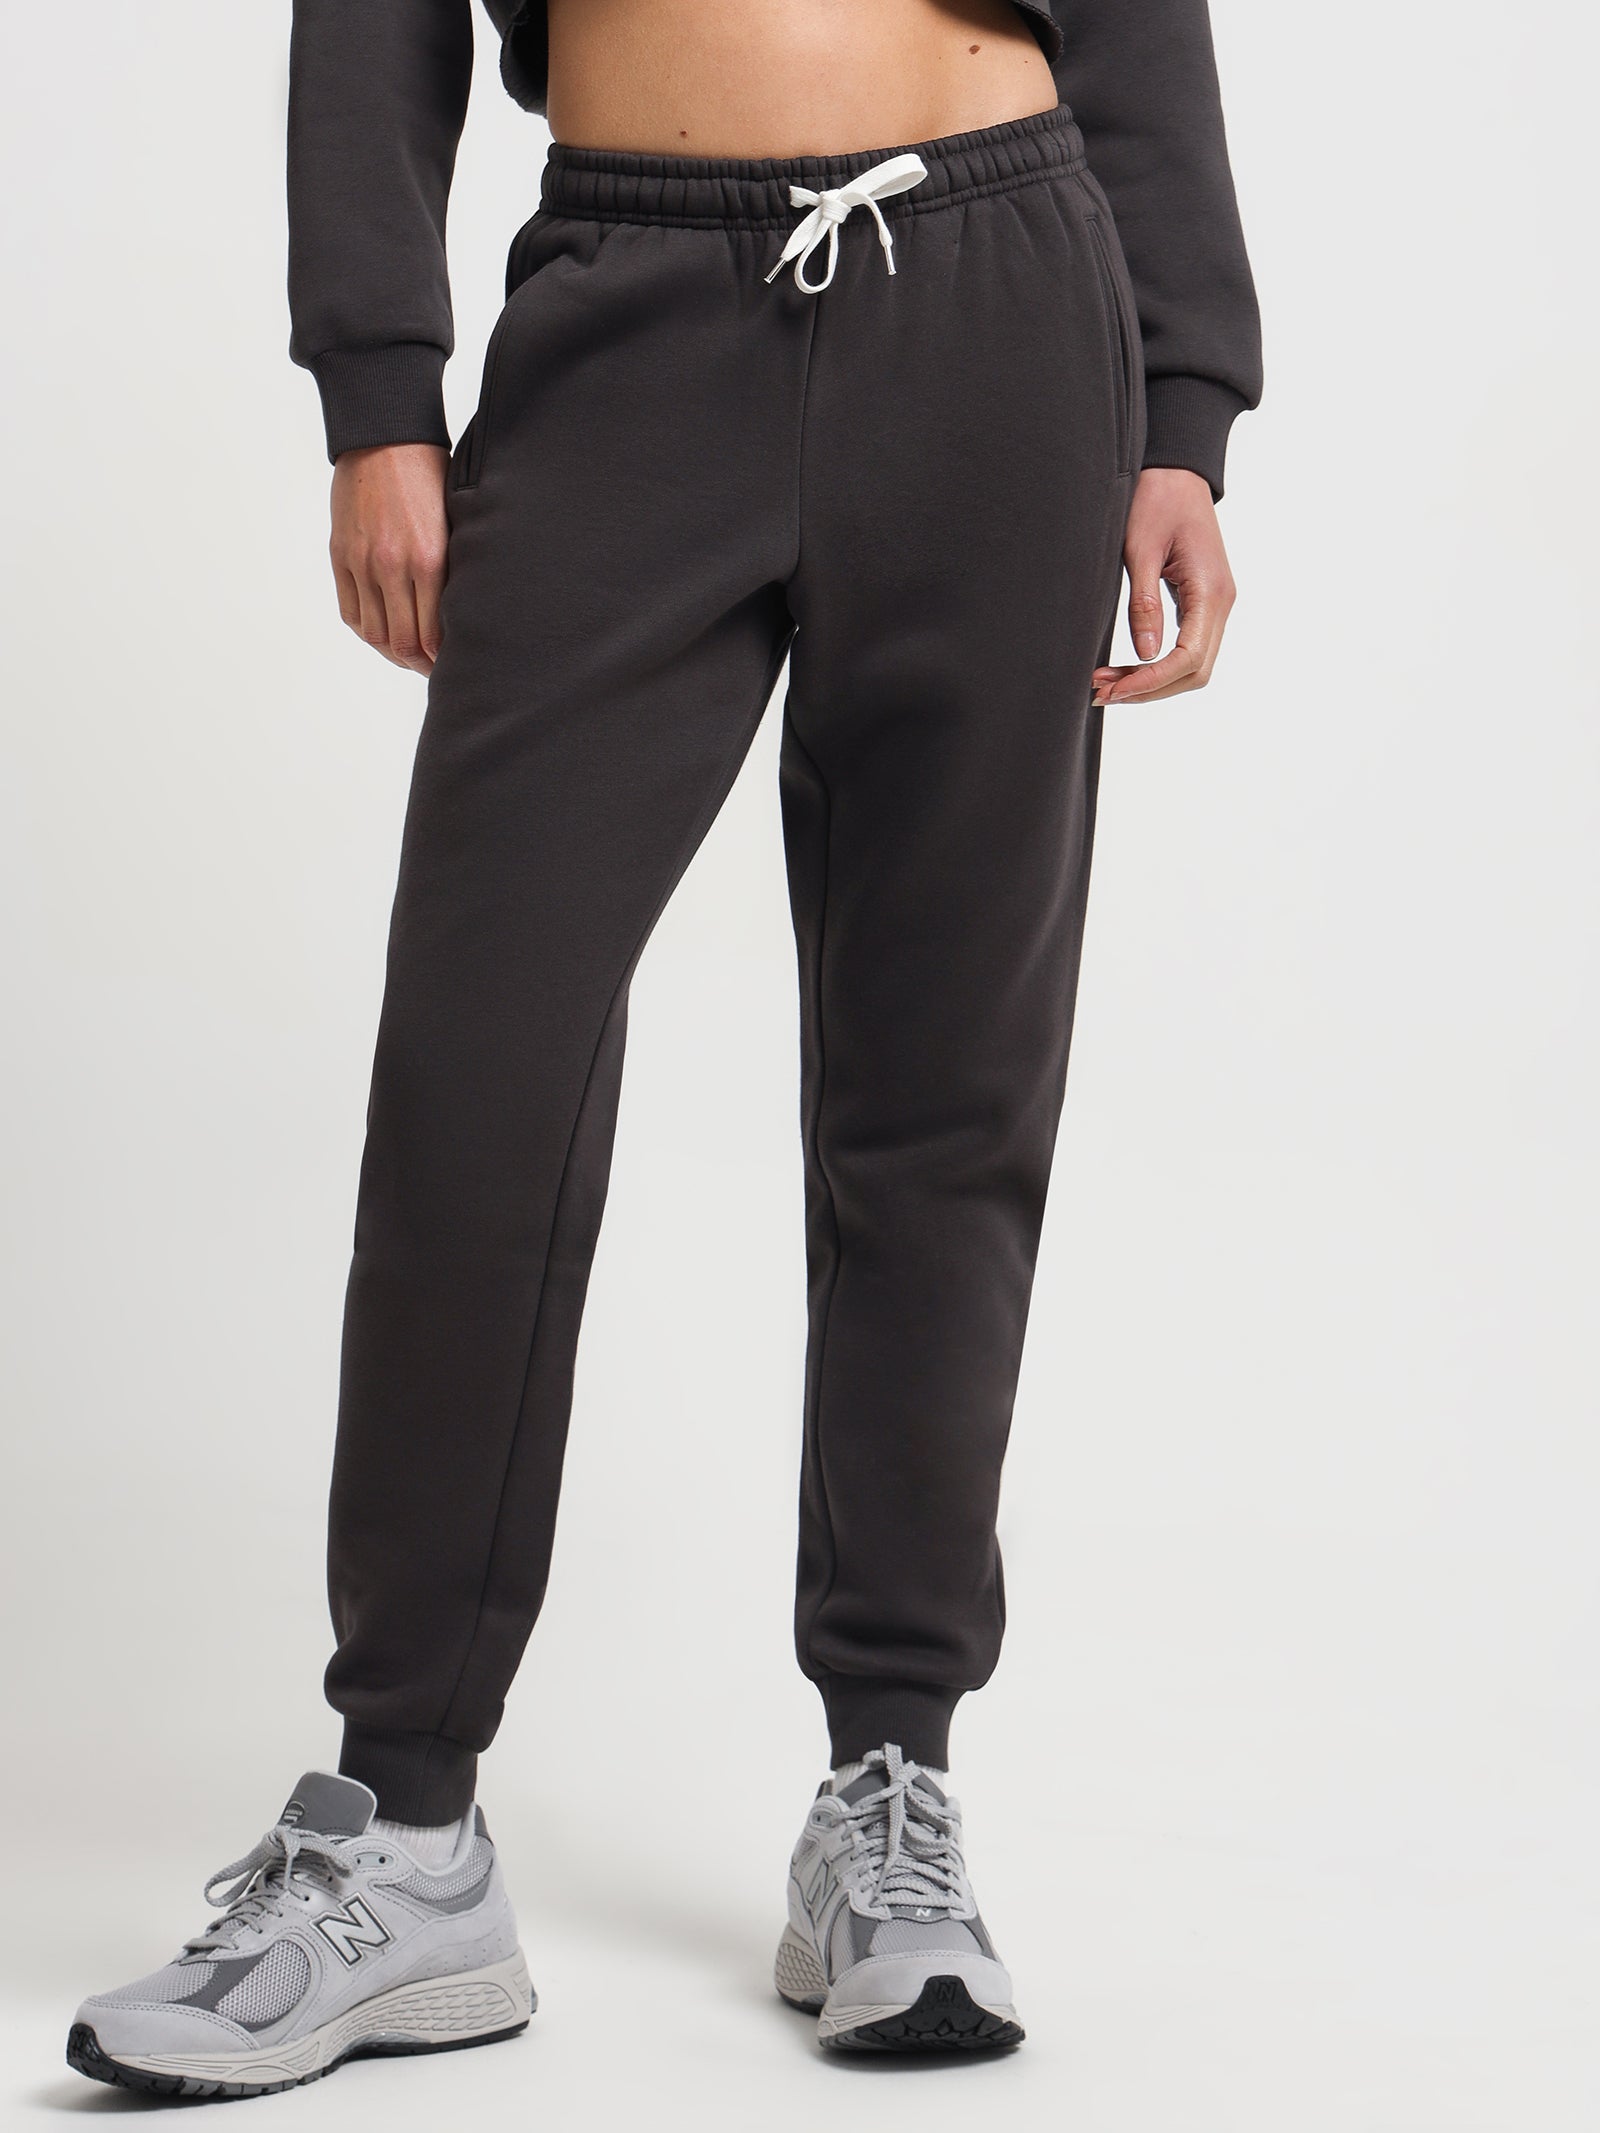 Women's Classic Trackpants in Black